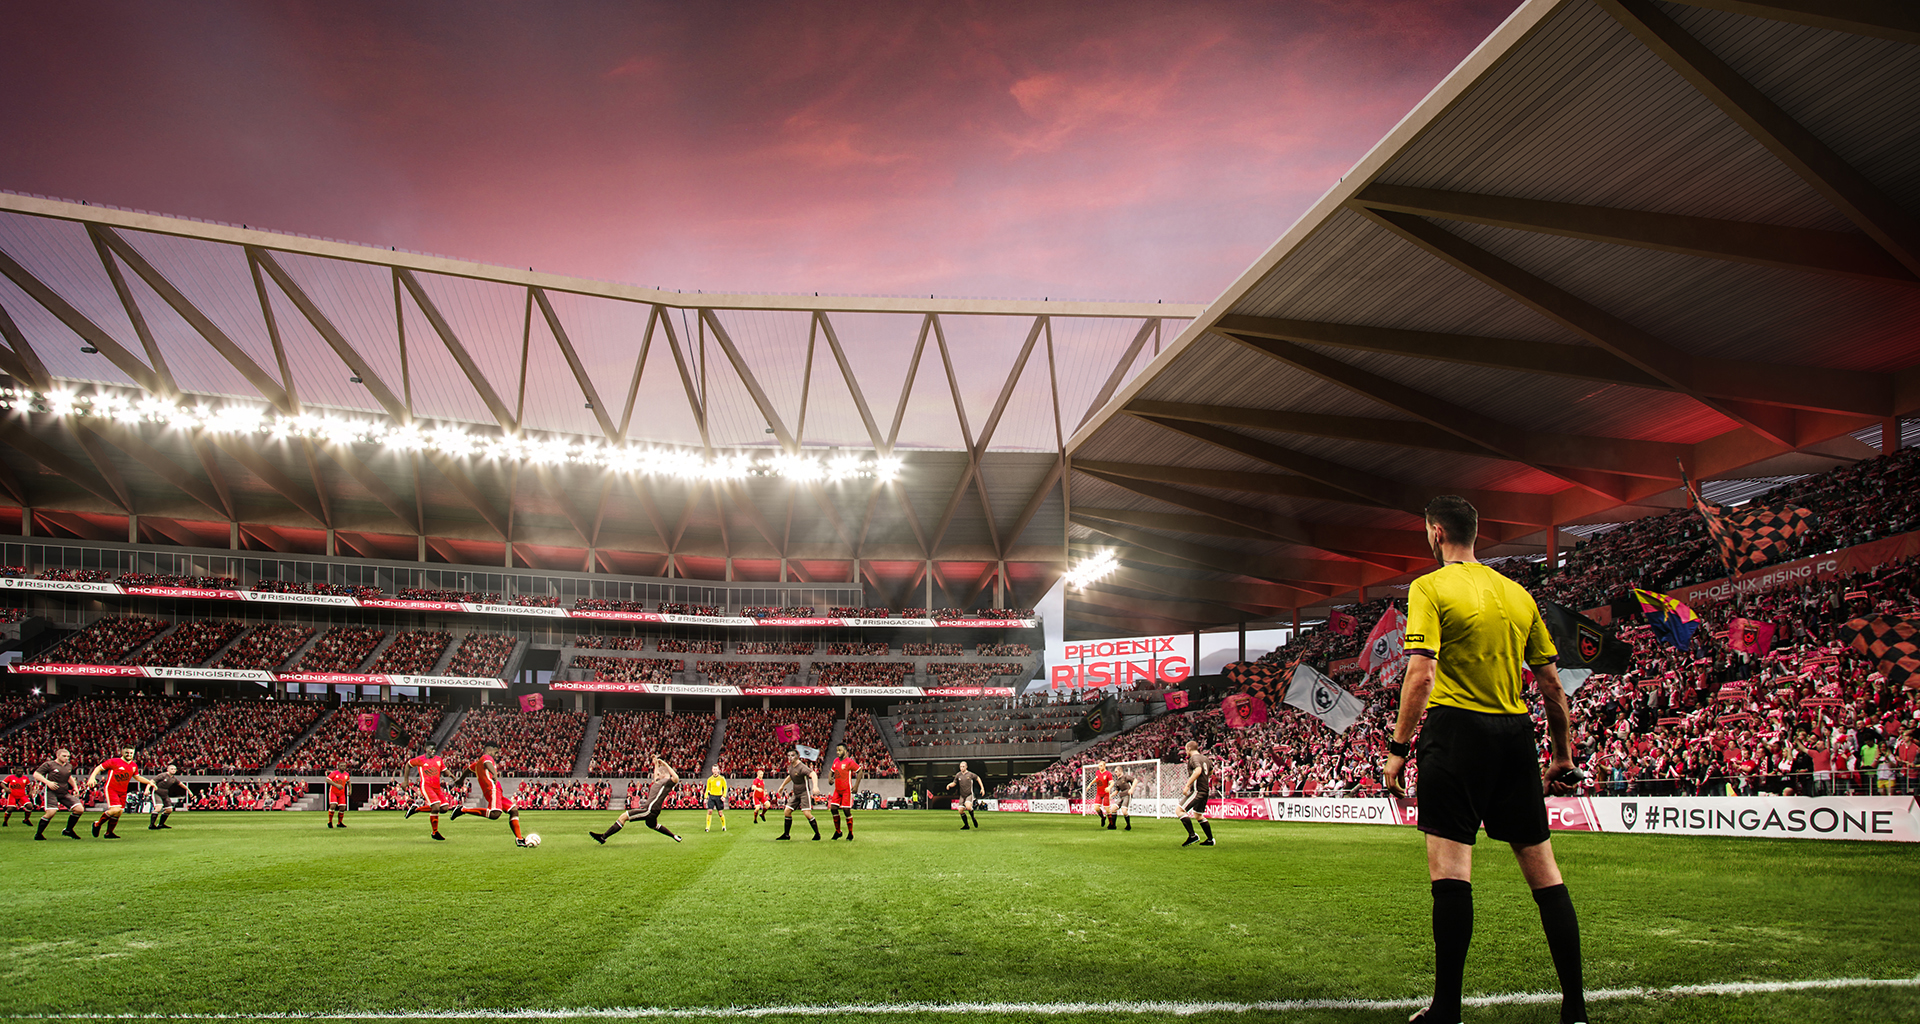 Other MLS Expansion Bids Could Rise - Soccer Stadium Digest